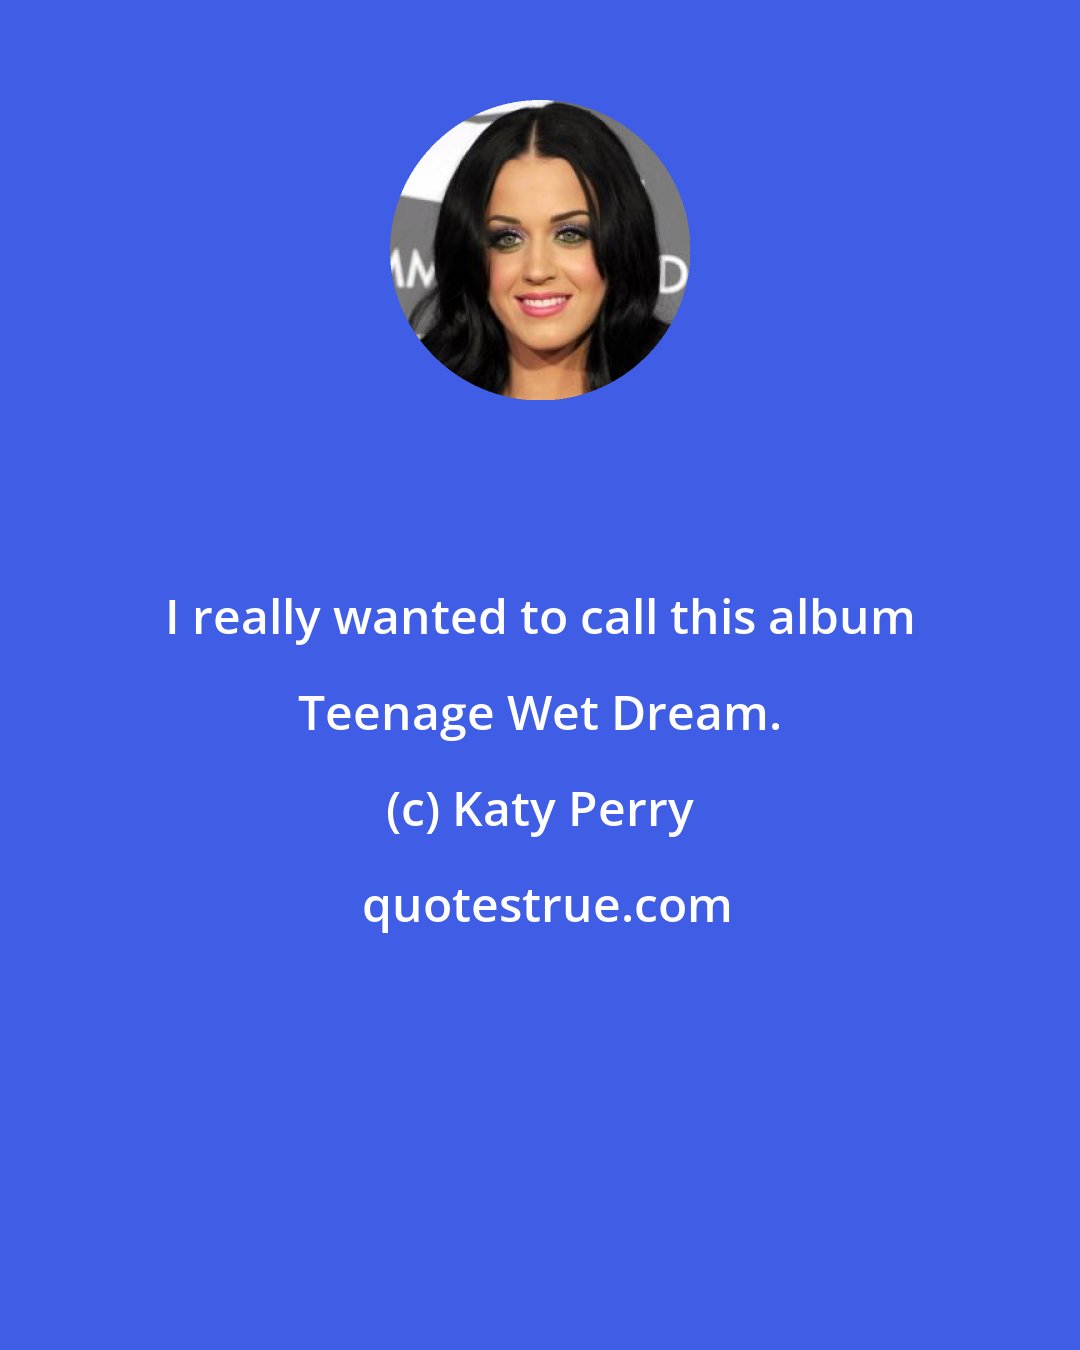 Katy Perry: I really wanted to call this album Teenage Wet Dream.